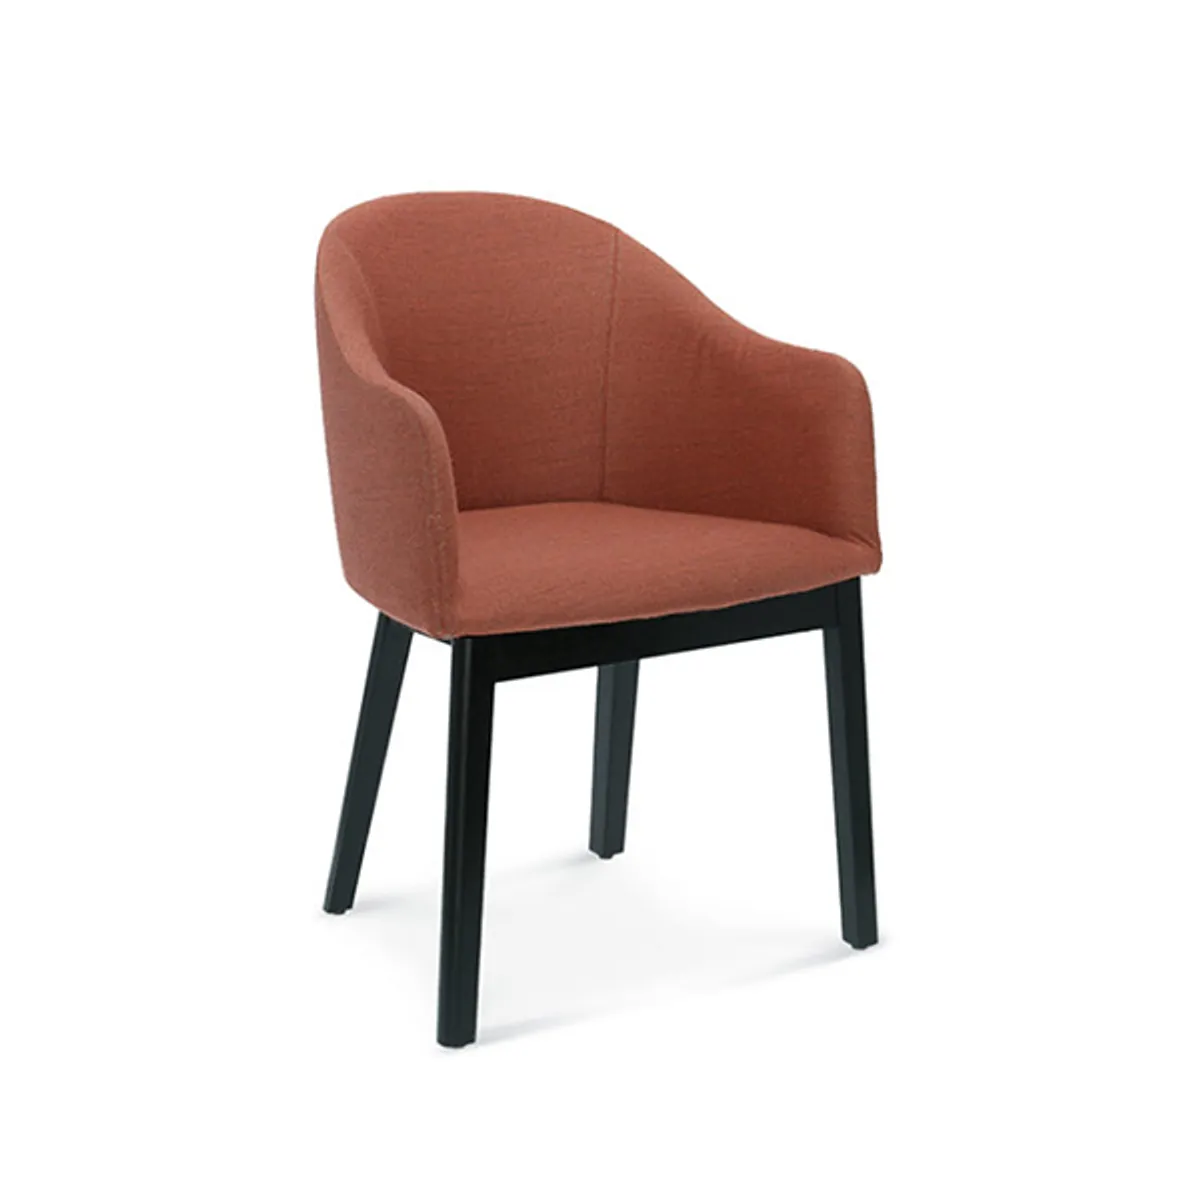 Luca Armchair Upholstered For Commercial Use By Insideoutcontracts 022